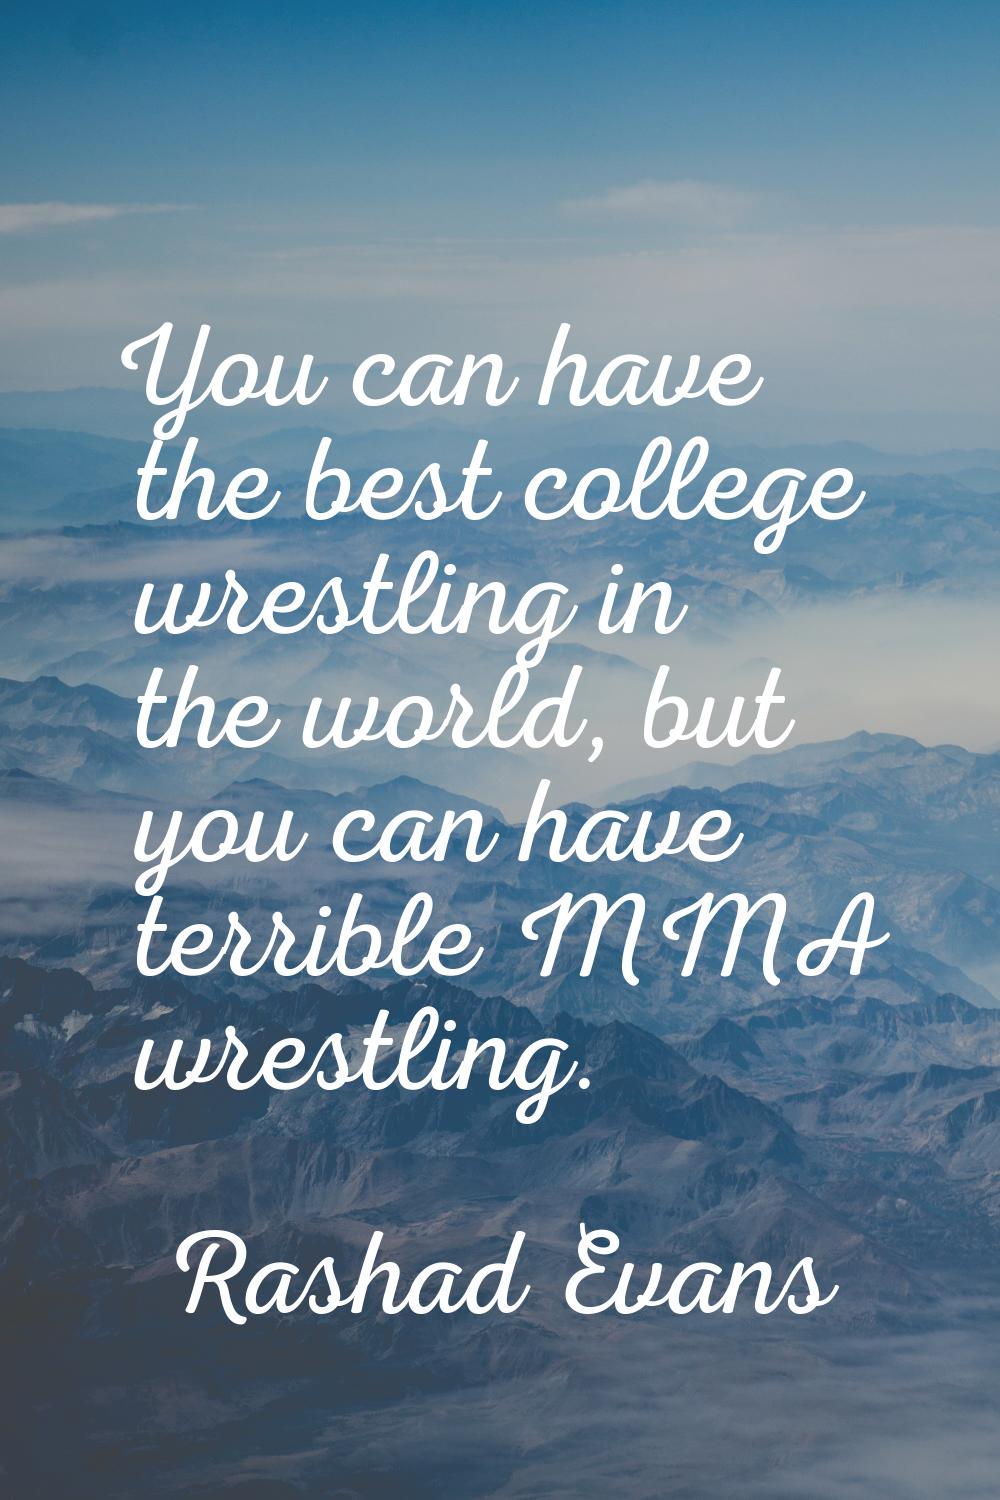 You can have the best college wrestling in the world, but you can have terrible MMA wrestling.